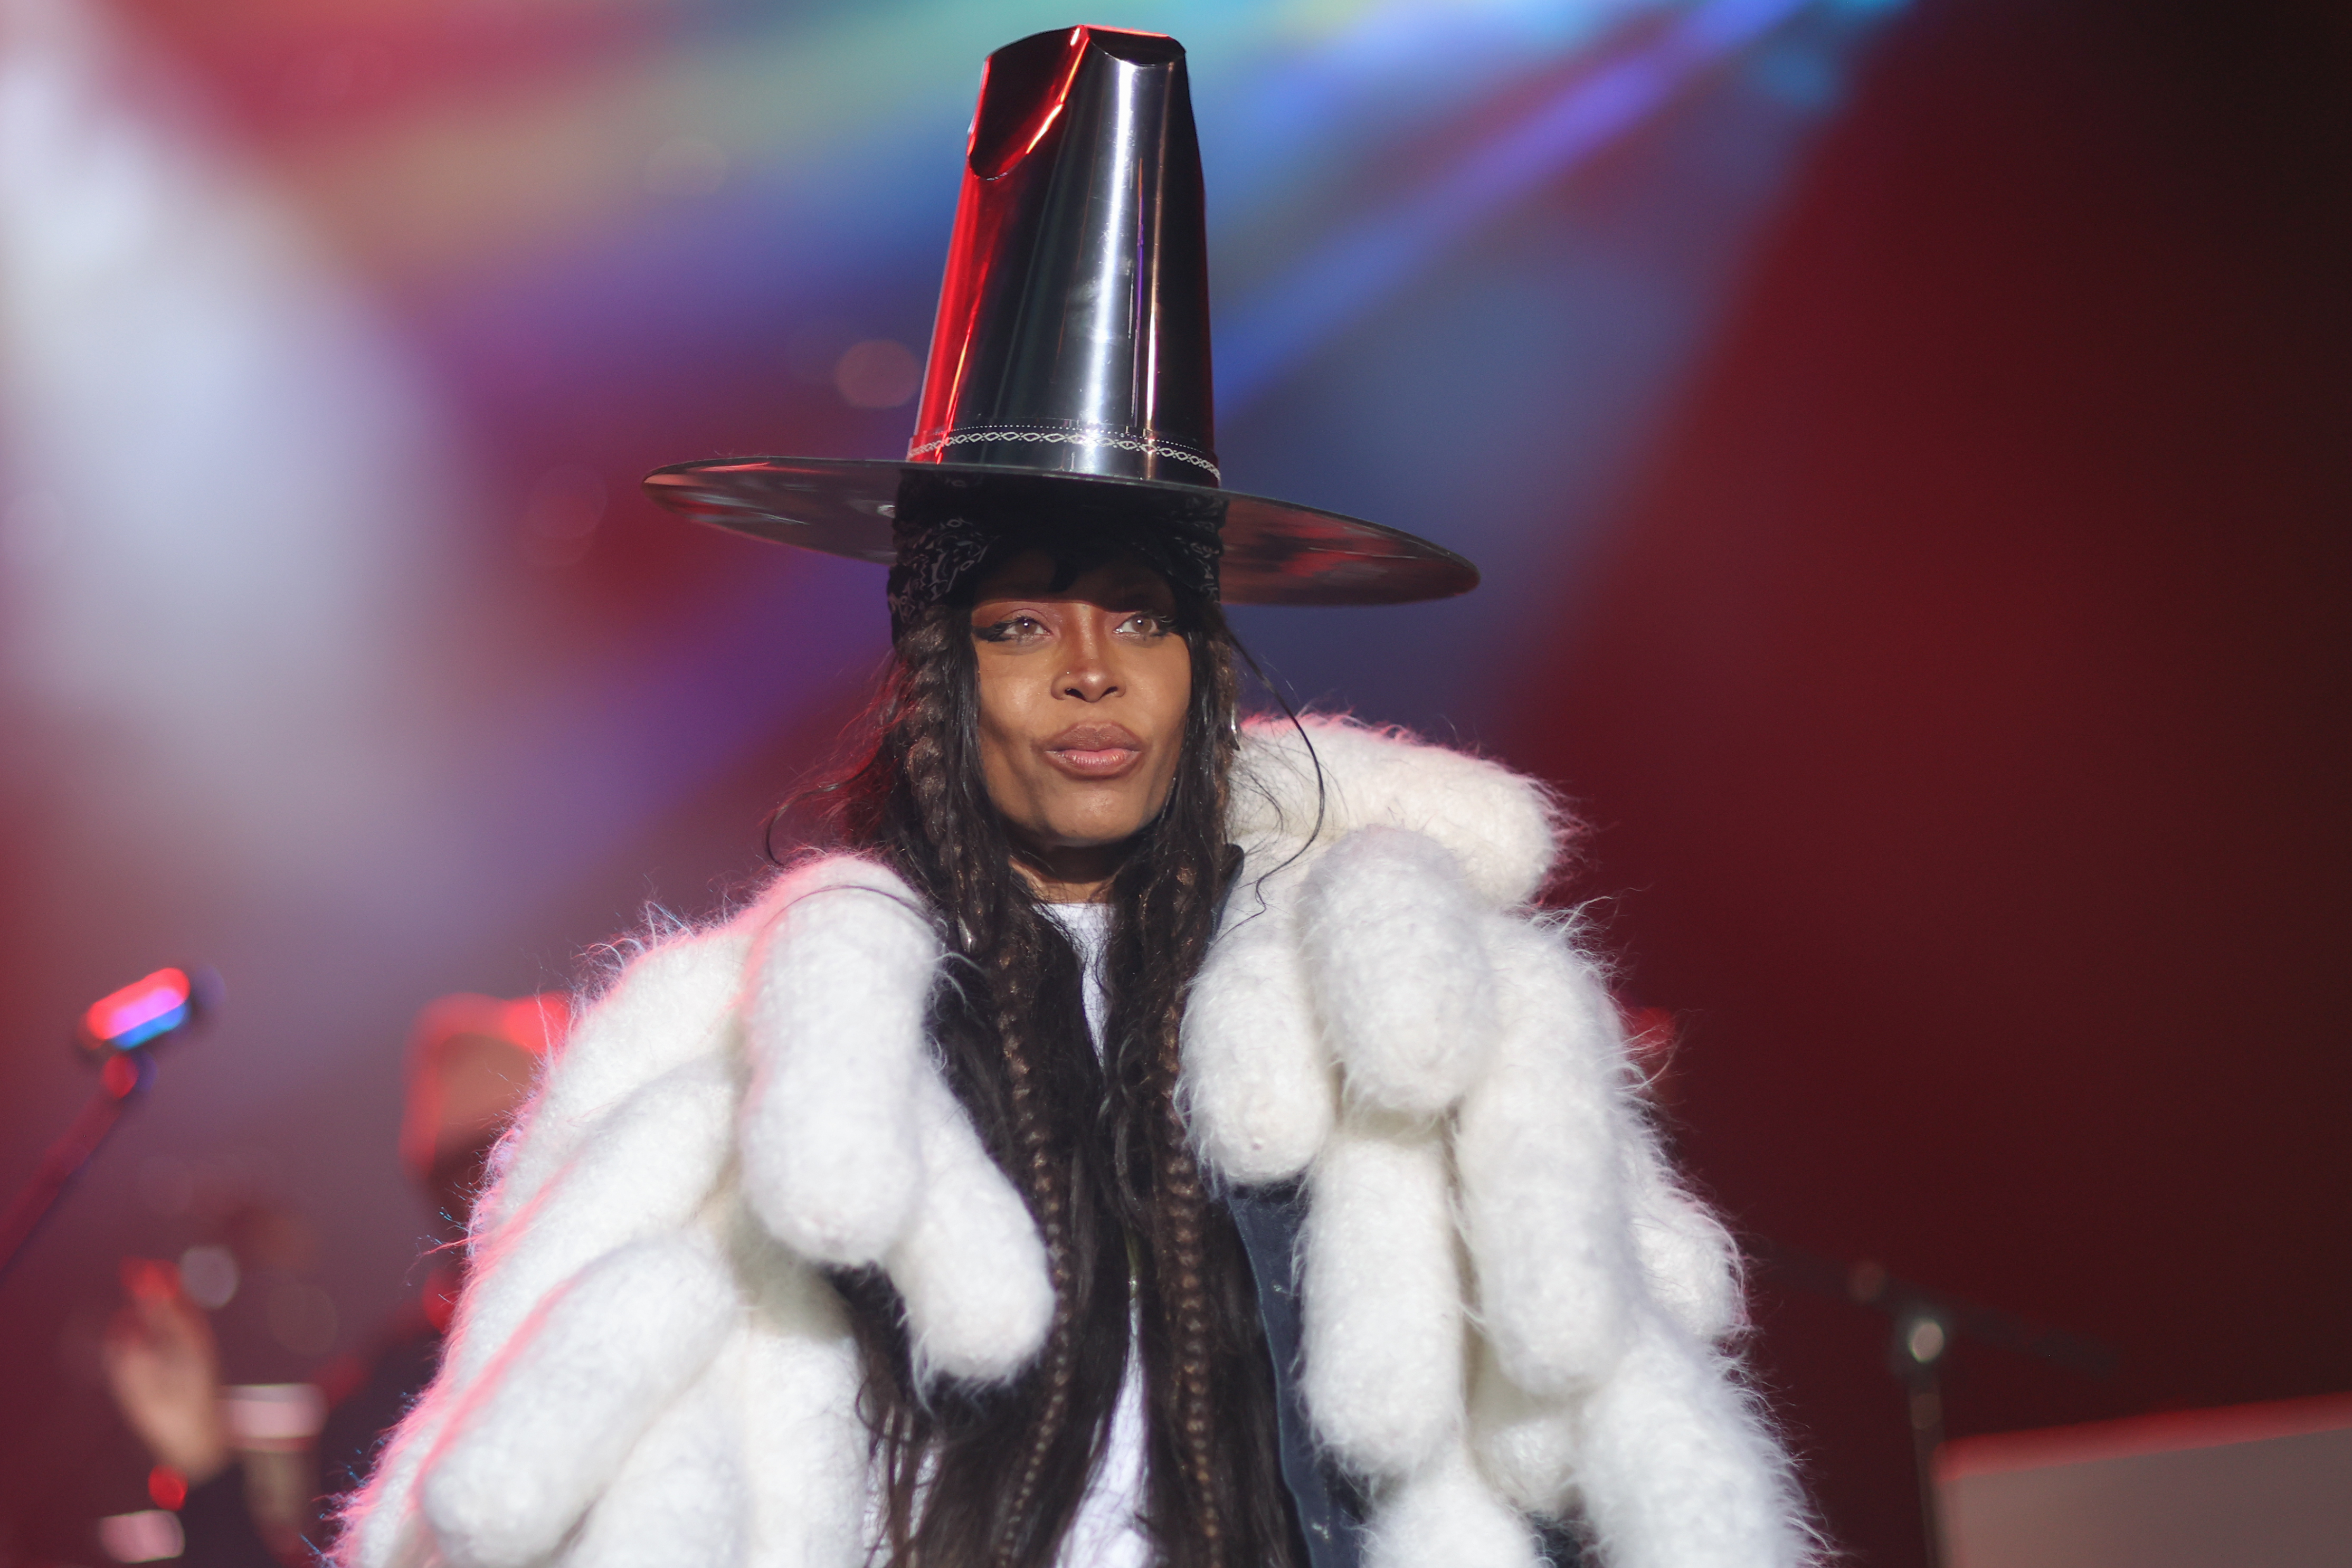 Erykah Badu on stage during Another Badu Birthday Bash concert at The Factory in Deep Ellum on February 24, 2023, in Dallas, Texas | Source: Getty Images